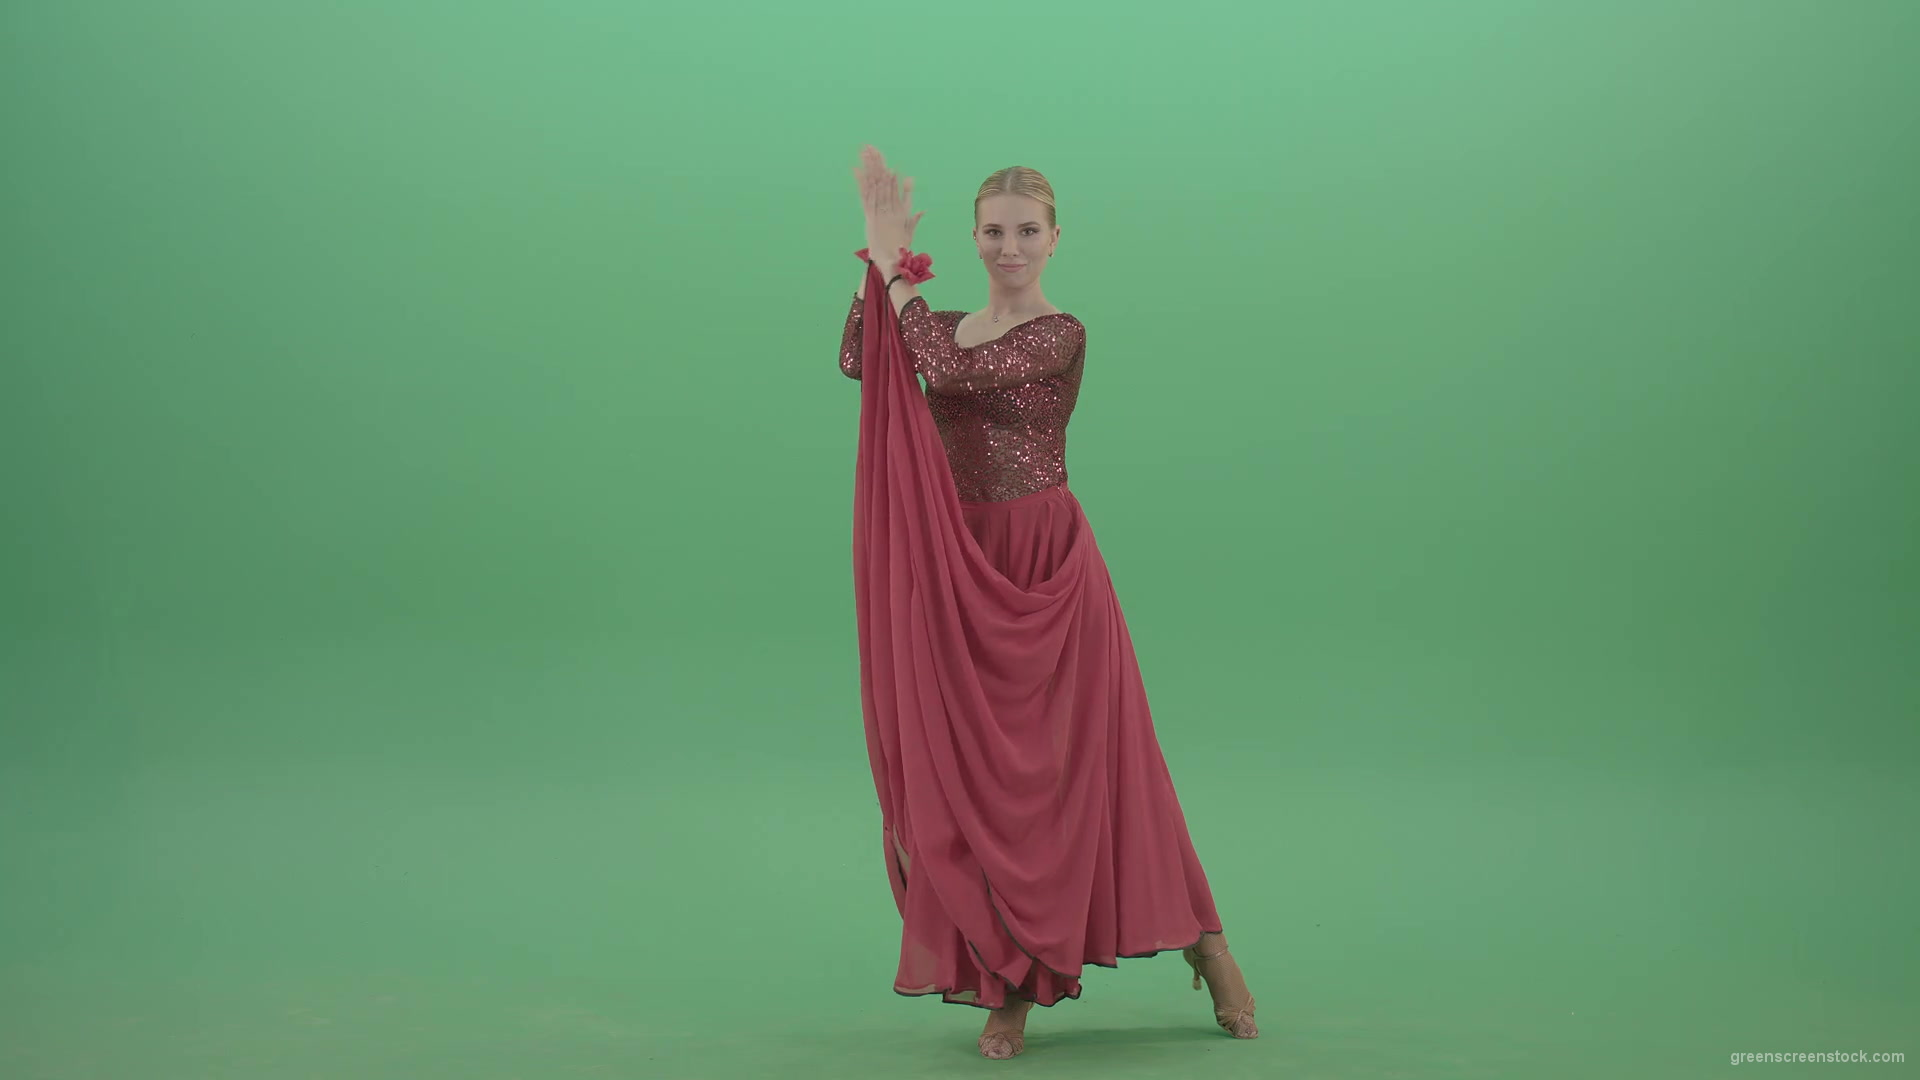 Elegant-woman-in-red-ballroom-dress-spinning-and-clapping-in-hands-isolated-on-green-screen-4K-Video-Footage-1920_007 Green Screen Stock